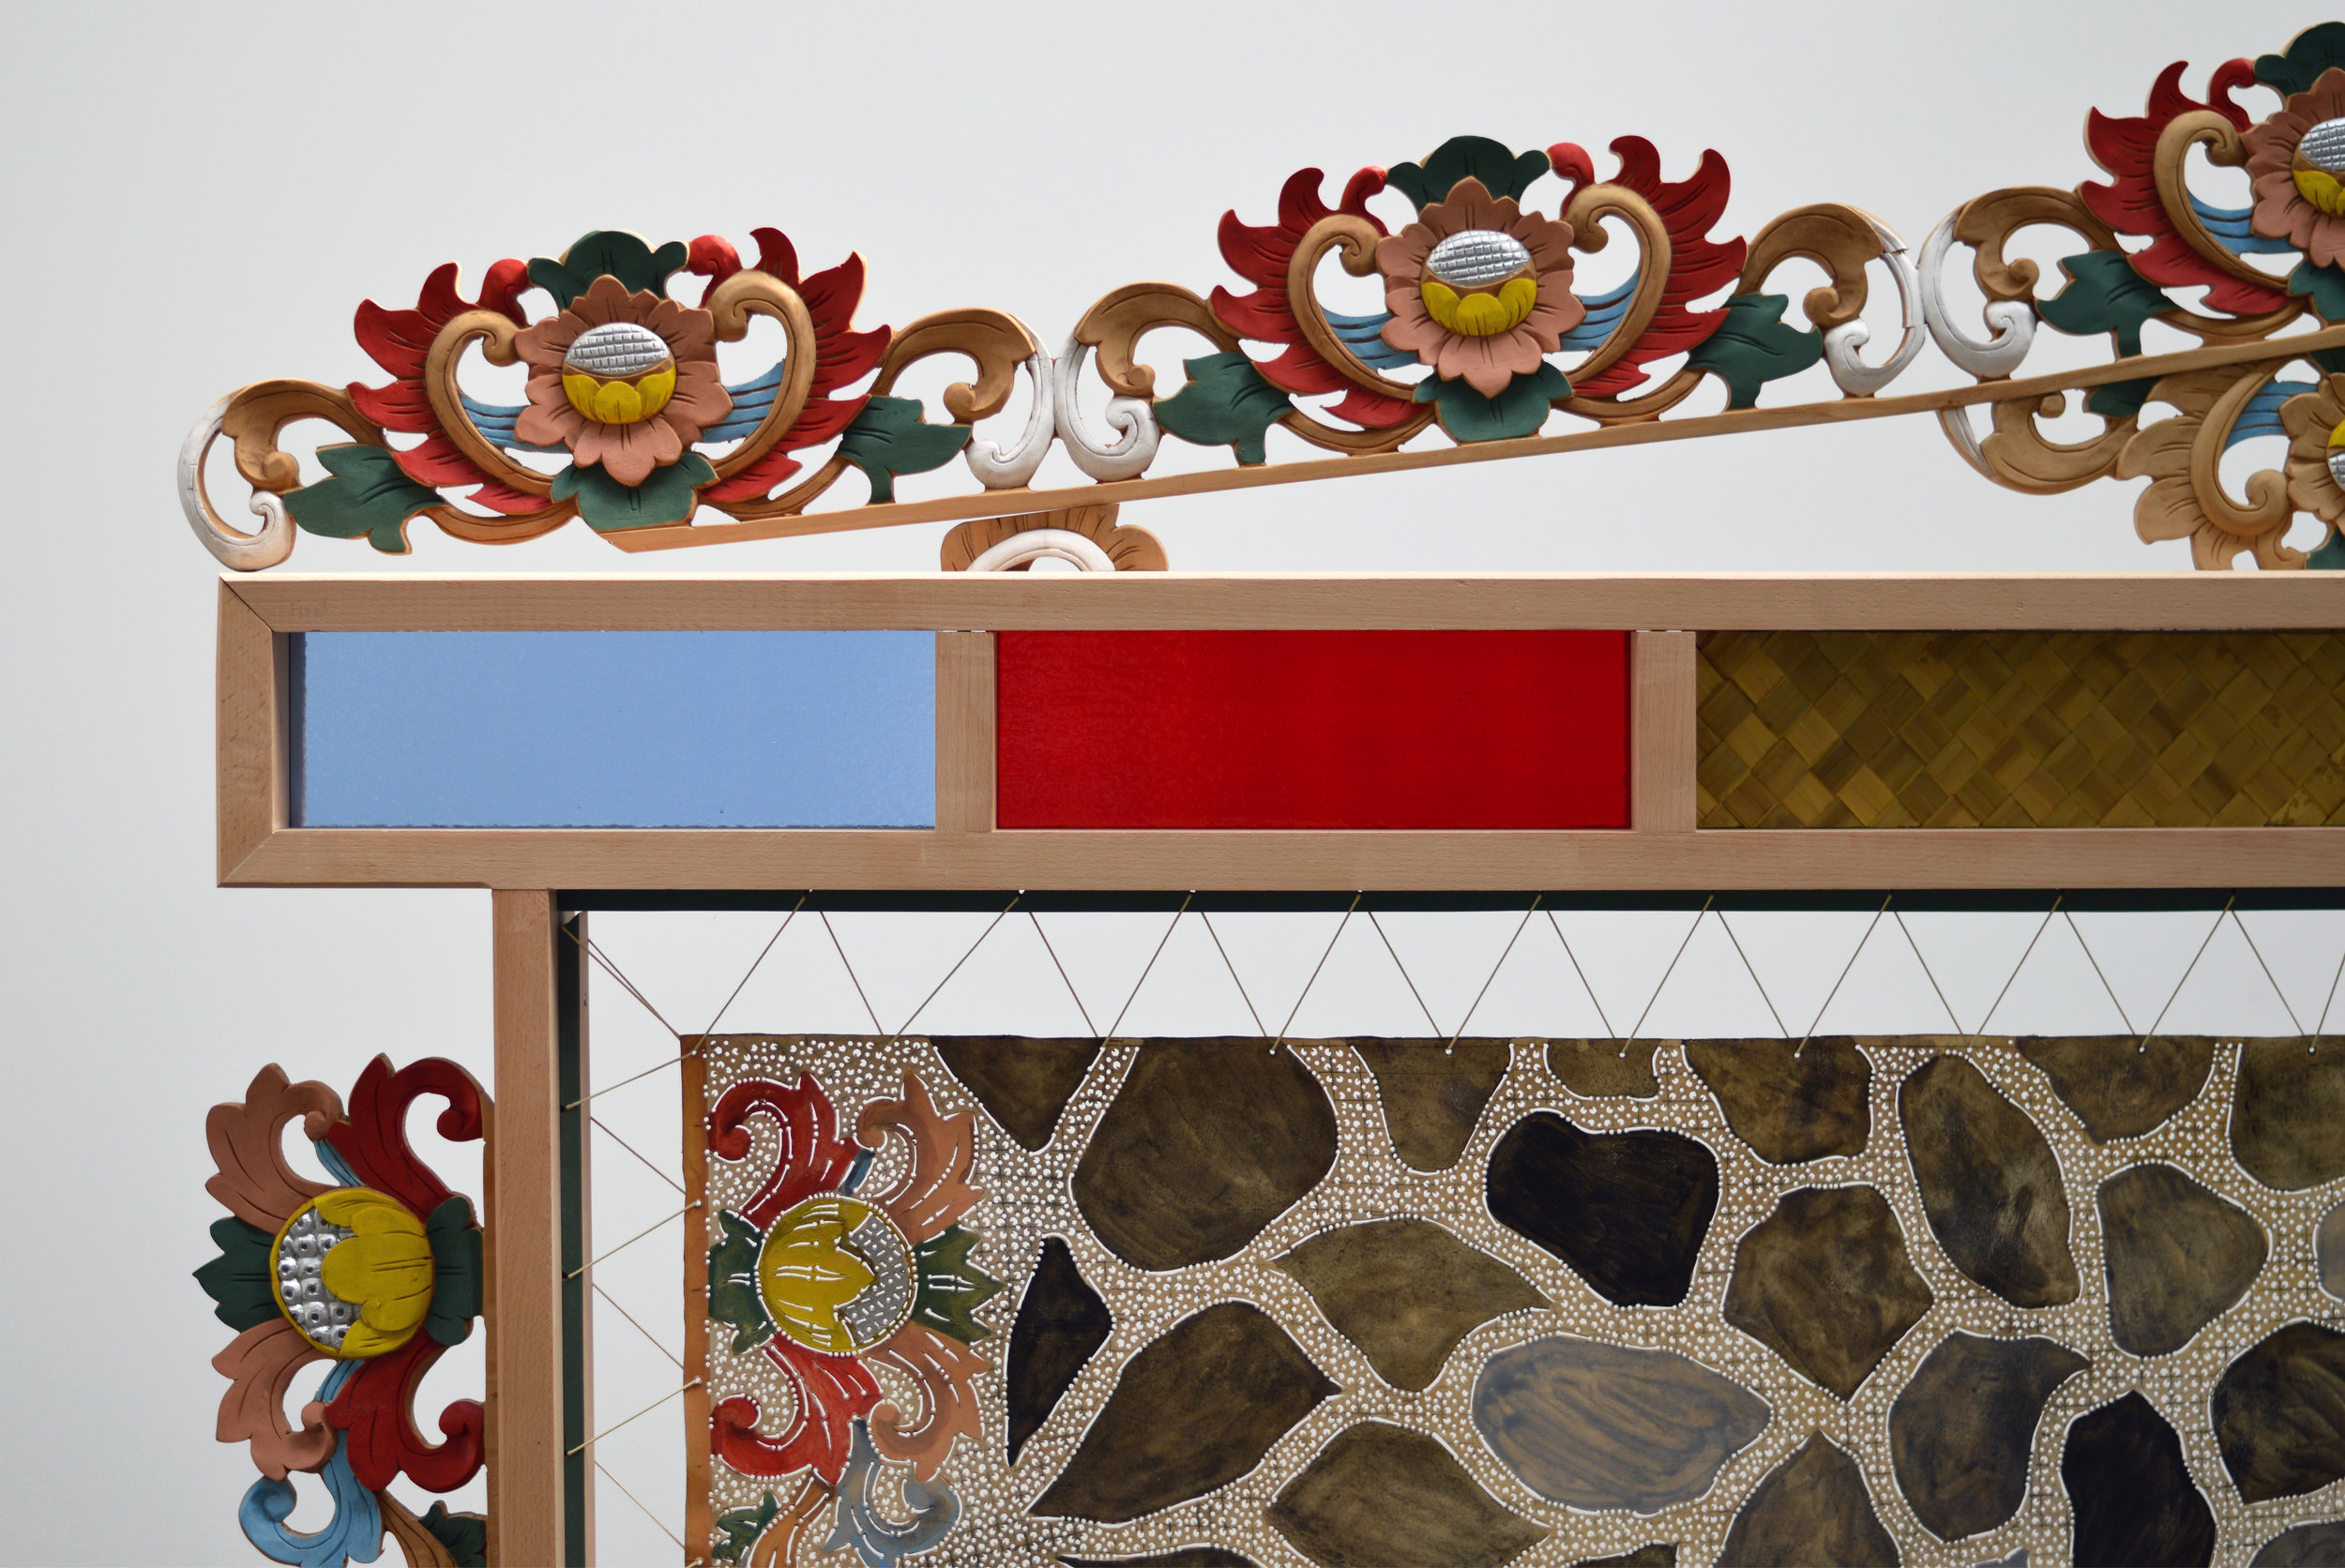   Adam de Boer      Room Screen for Mohawk Street  (detail)    2018 acrylic paint on hand carved hides, acrylic paint on hand carved teak, stained glass, and woven pandan leaf 74 x 96 x 16 inches    